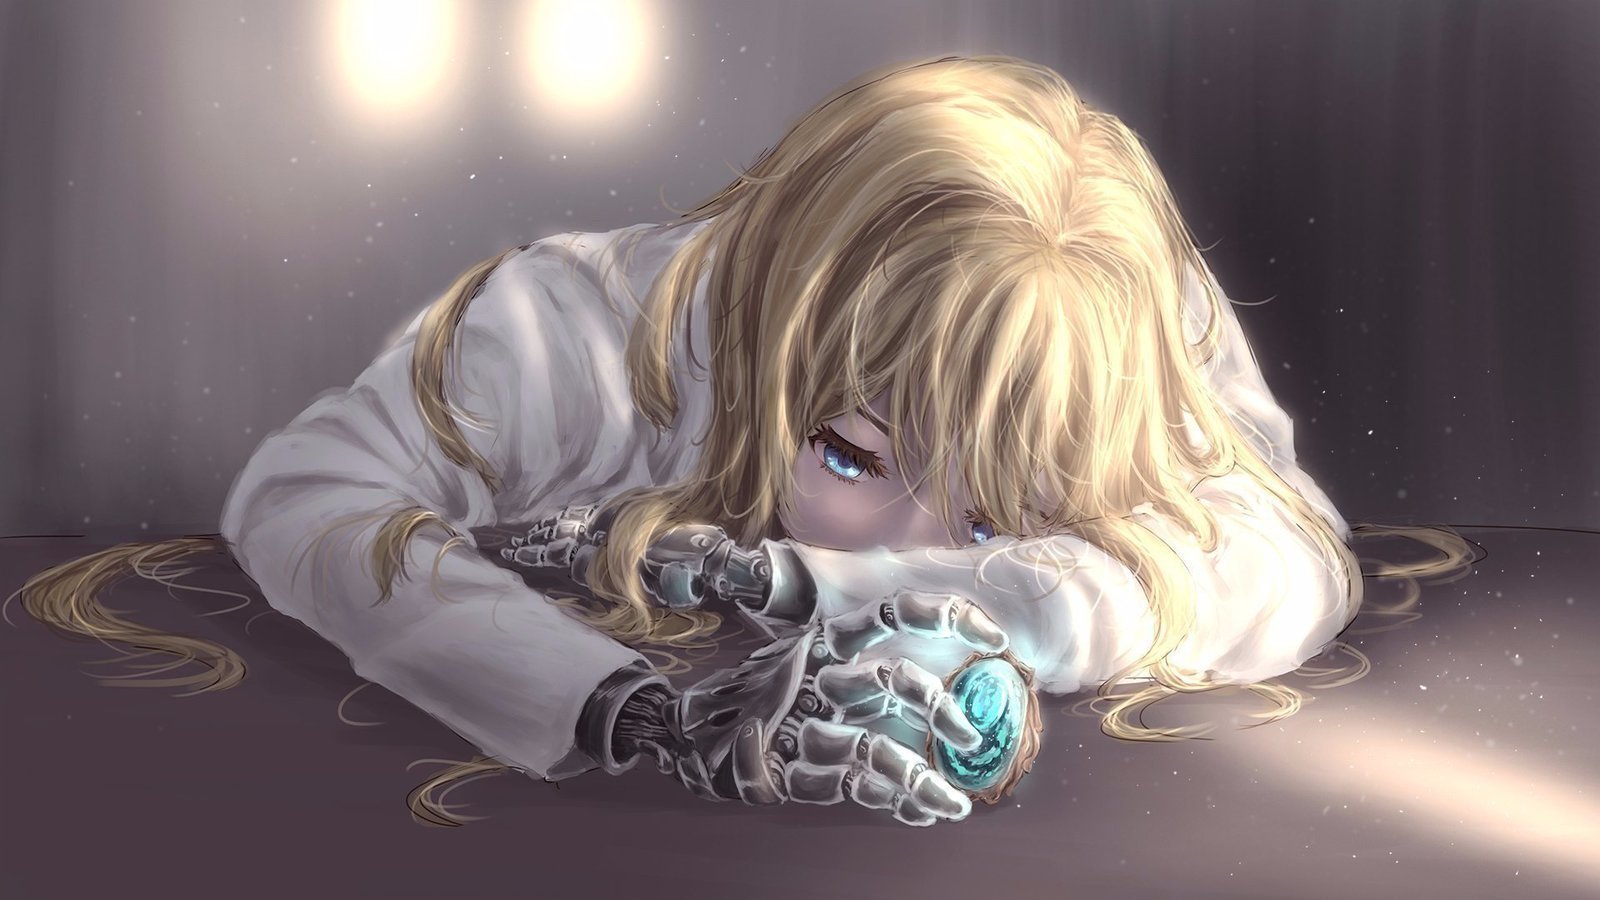 Petition · Violet Evergarden Movie In India · Change.org